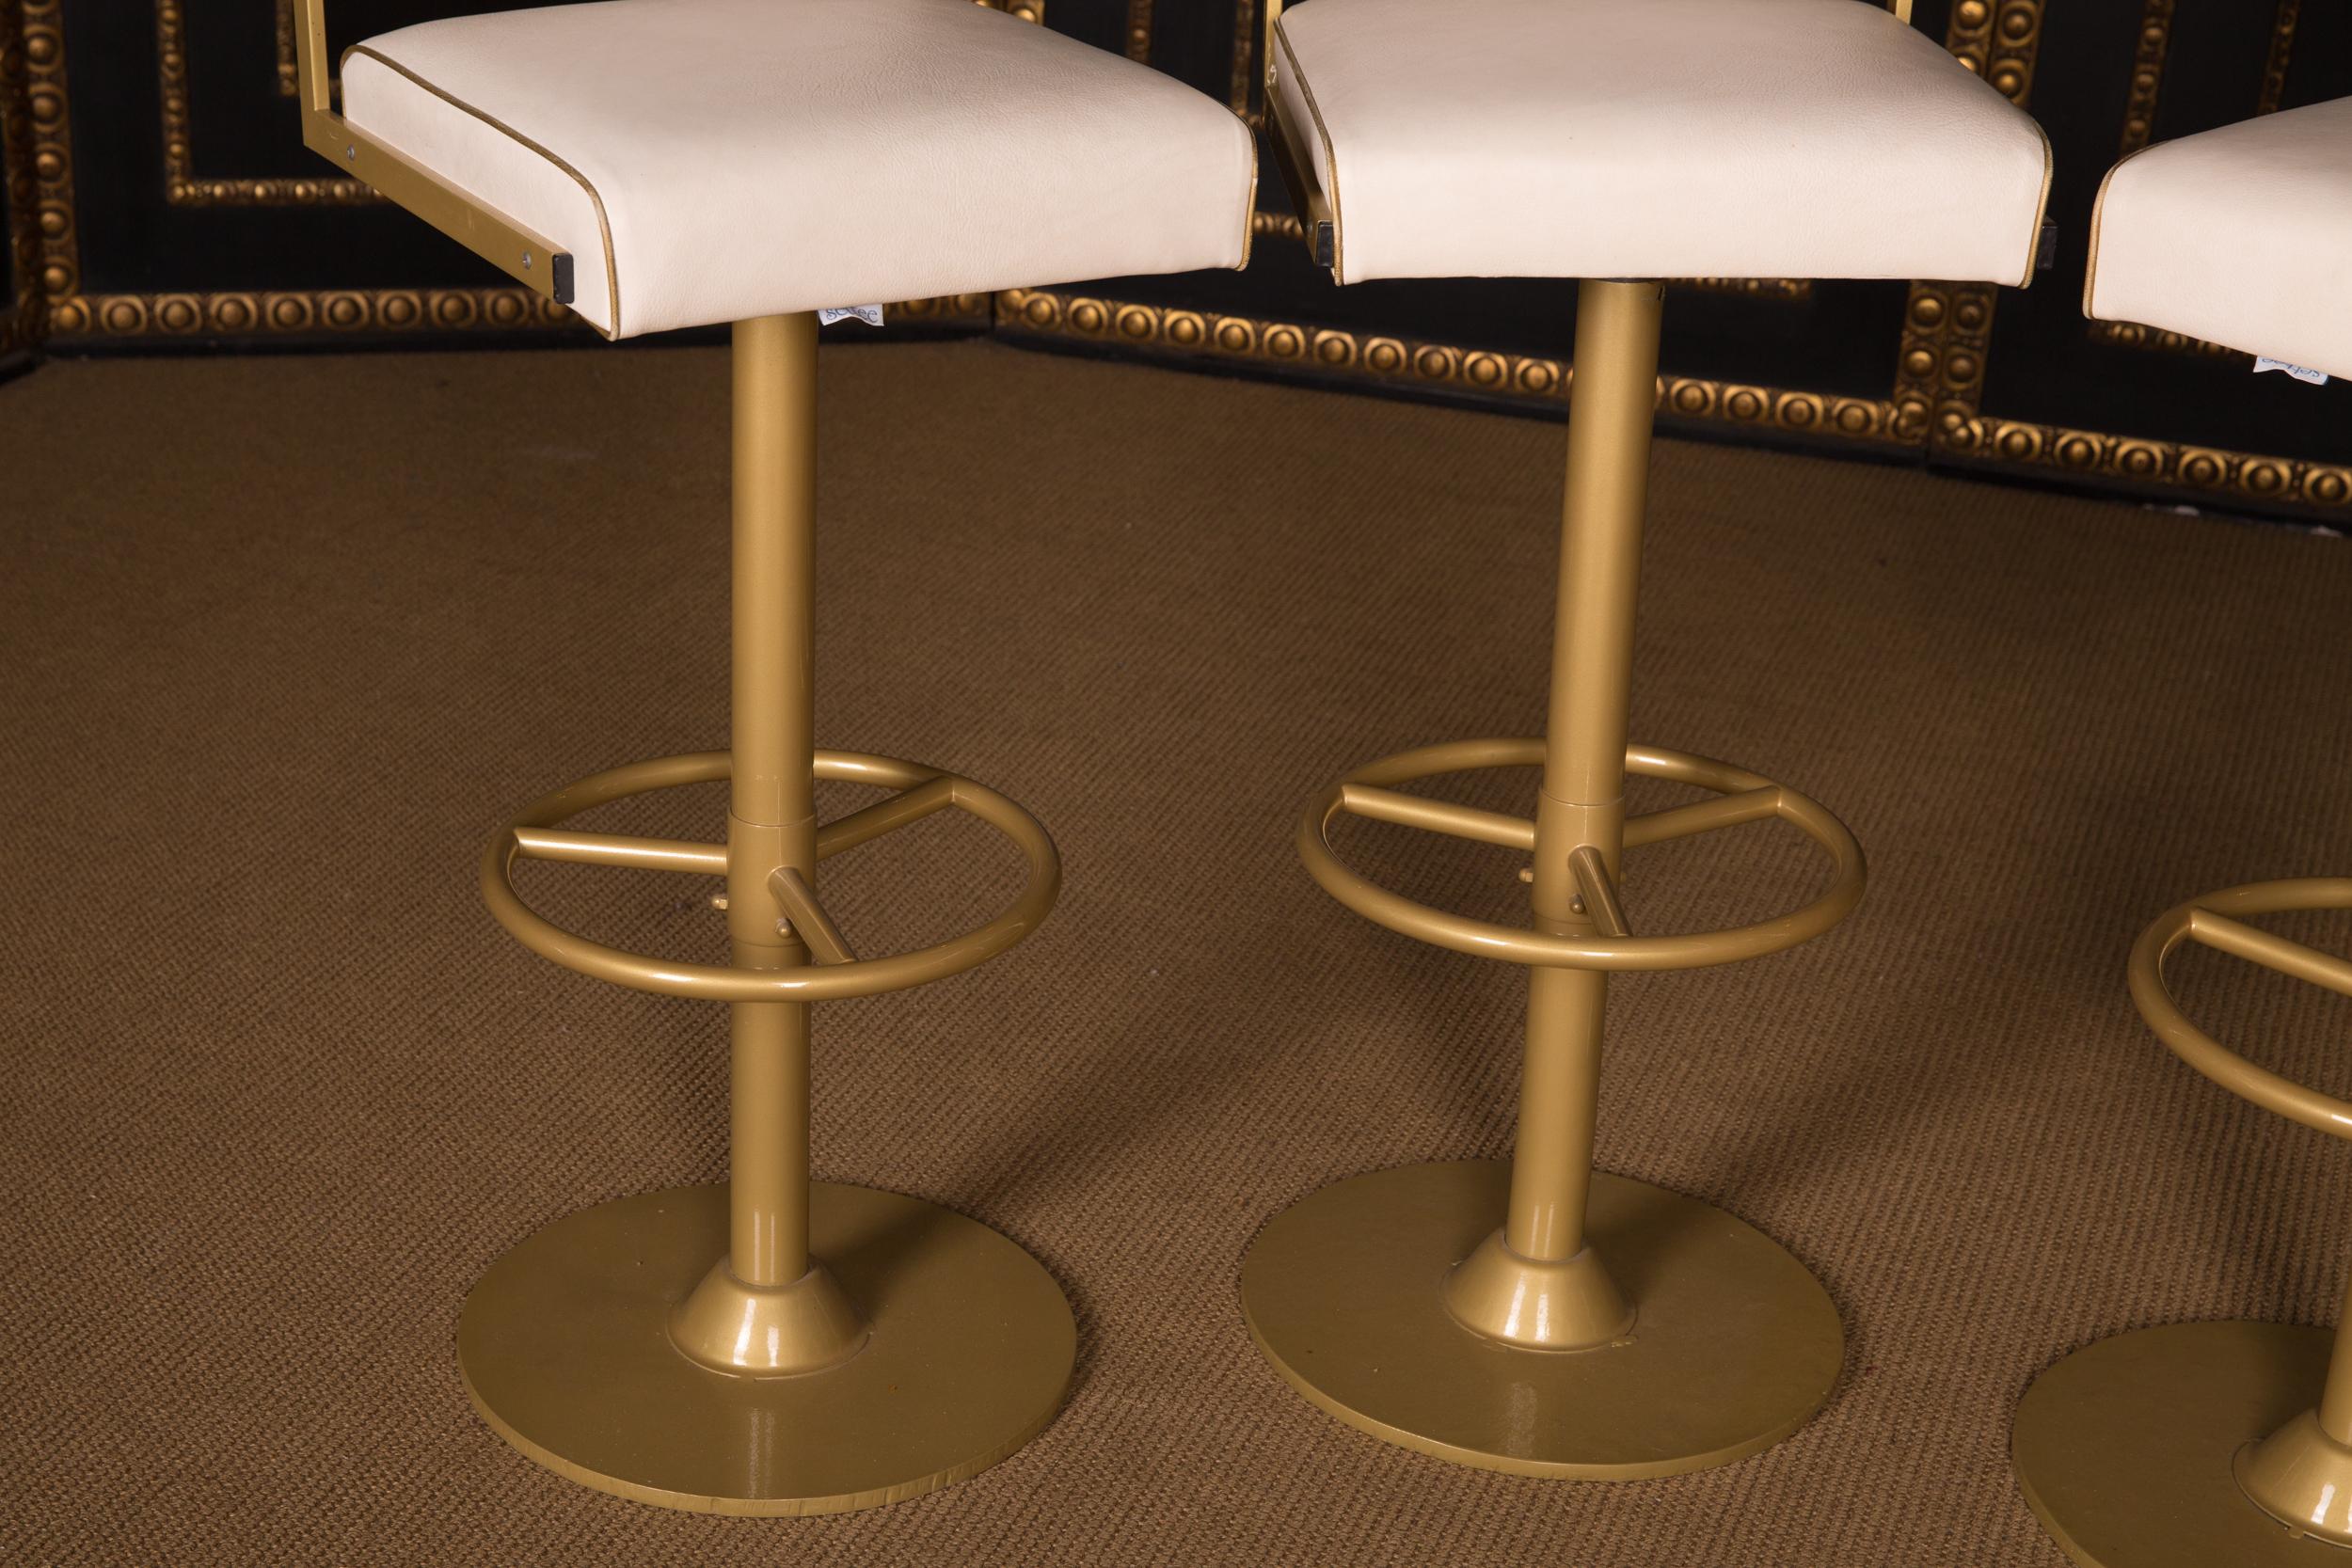 German Four High Quality Bar Stools Made of Metal in Golden Color